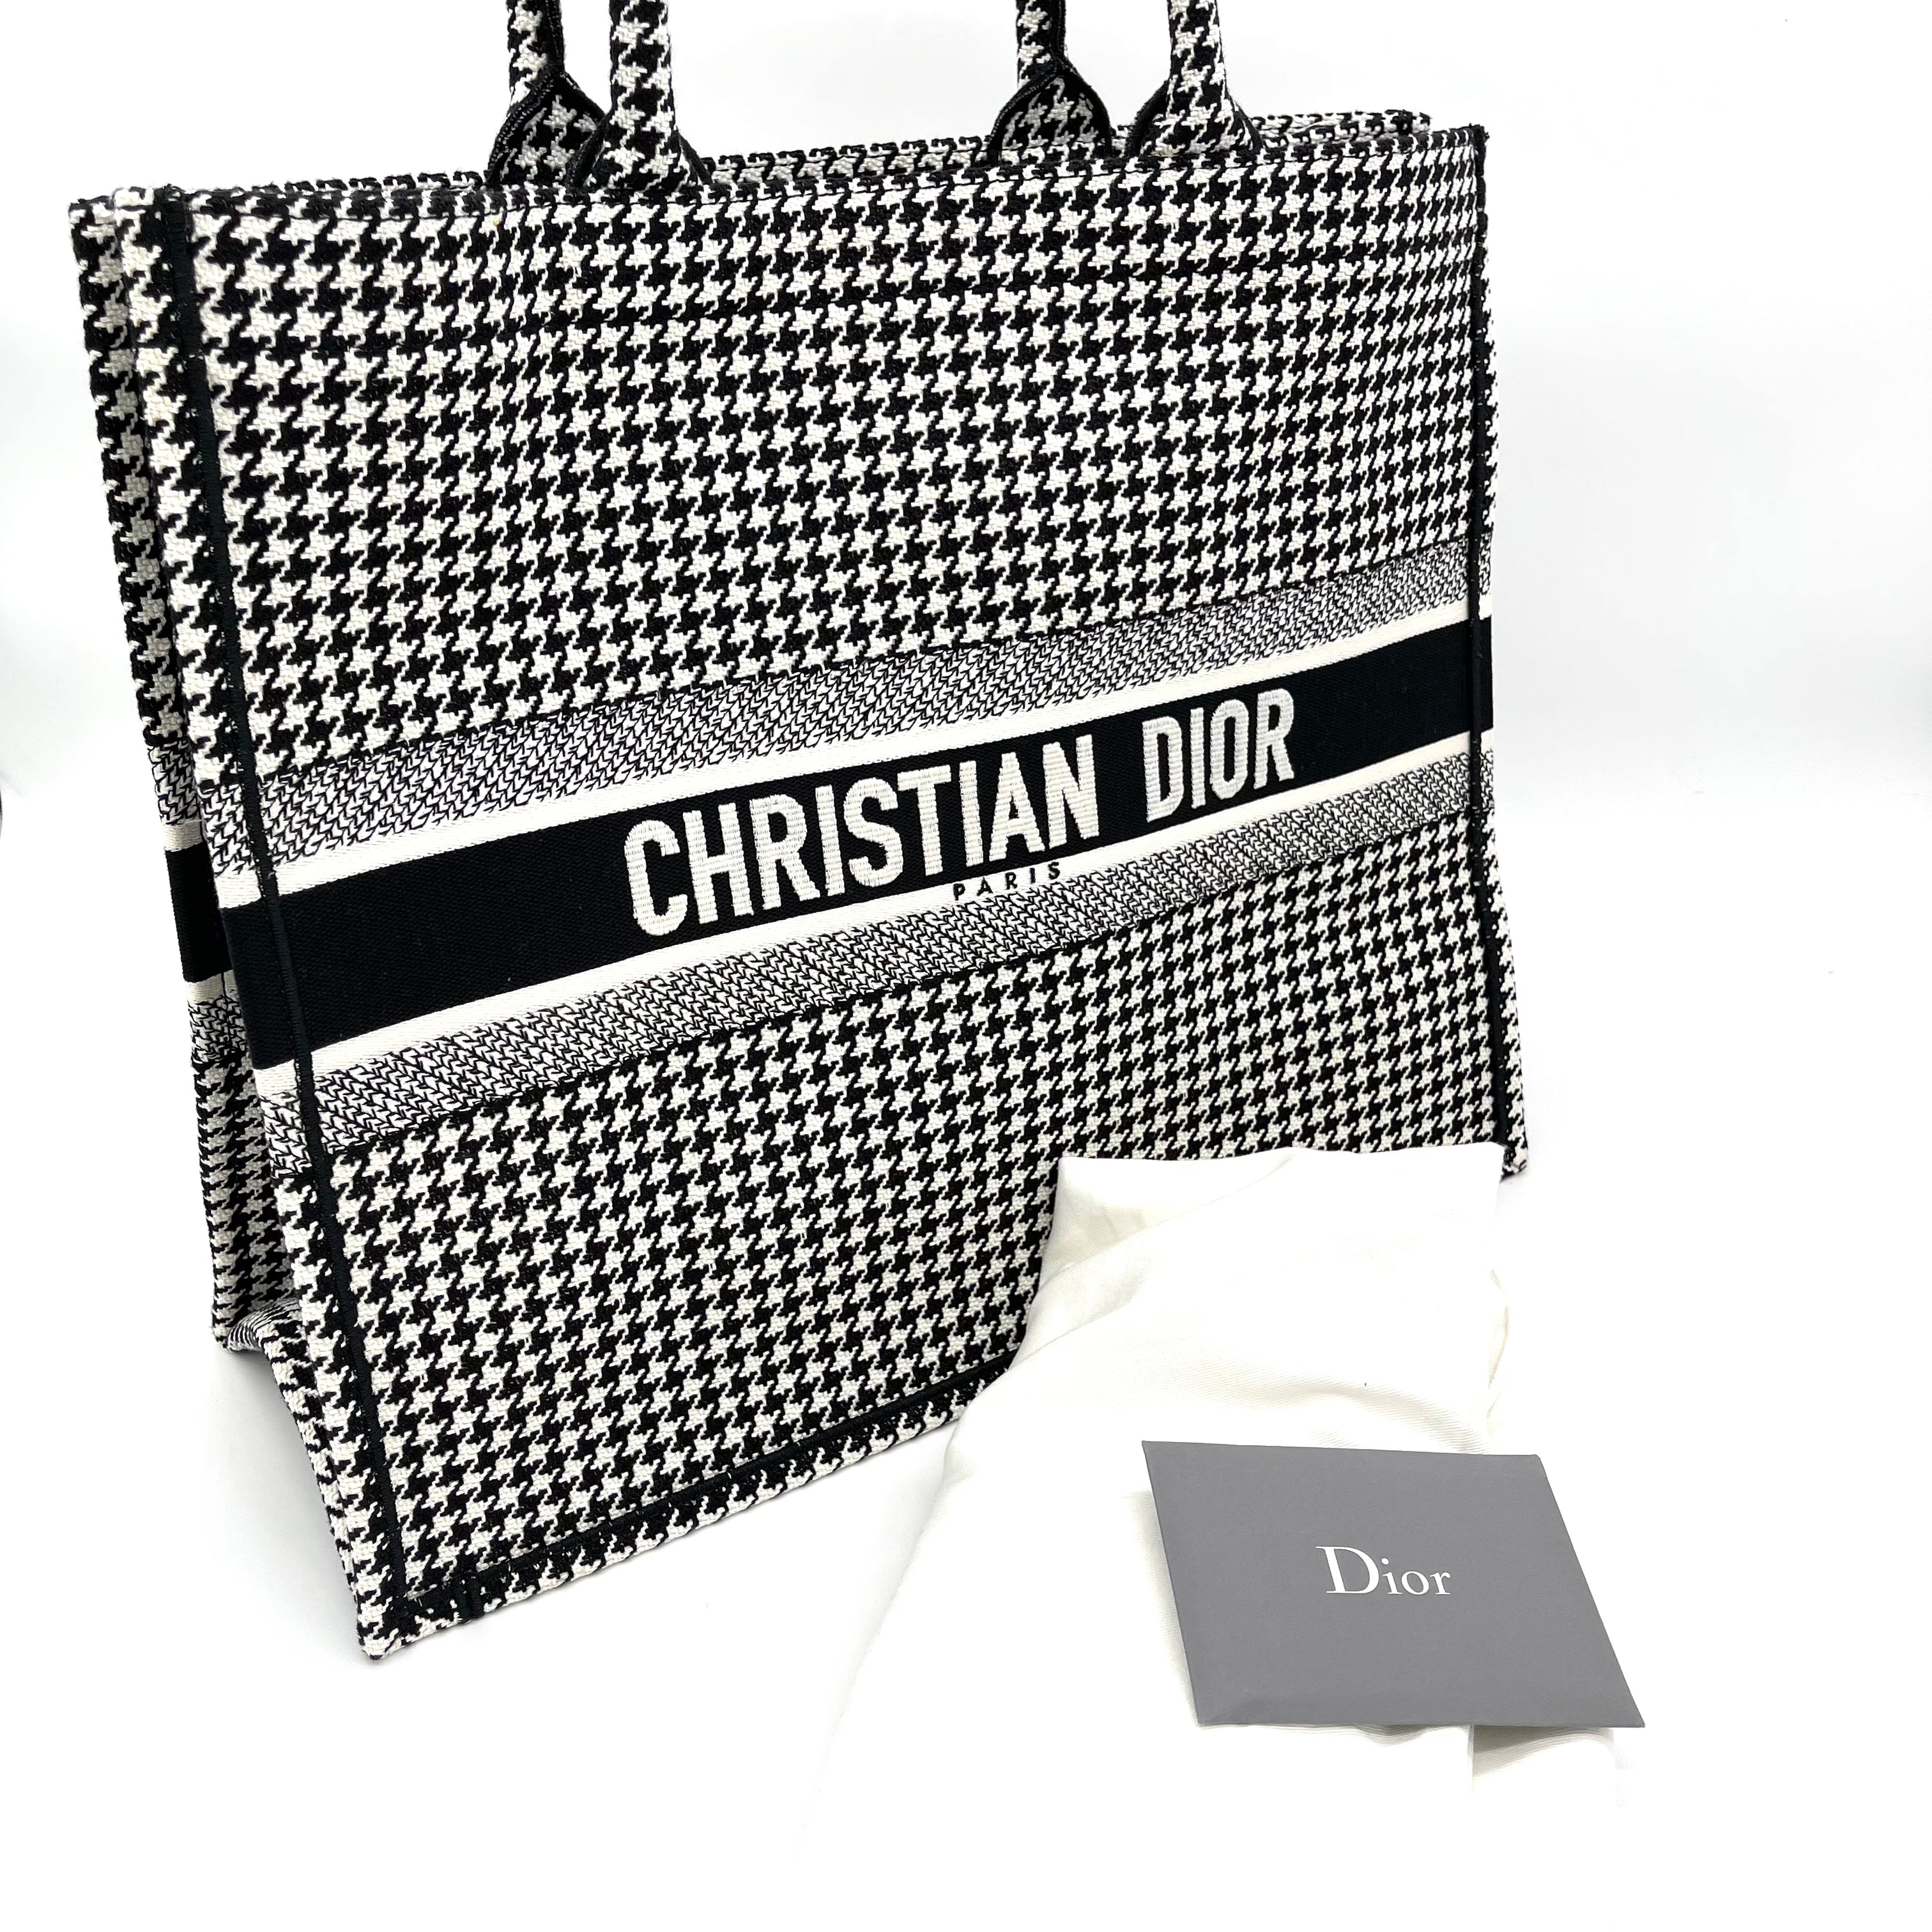 Christian Dior New Small Book Tote Macro Houndstooth Embroidery Black/ –  Coco Approved Studio